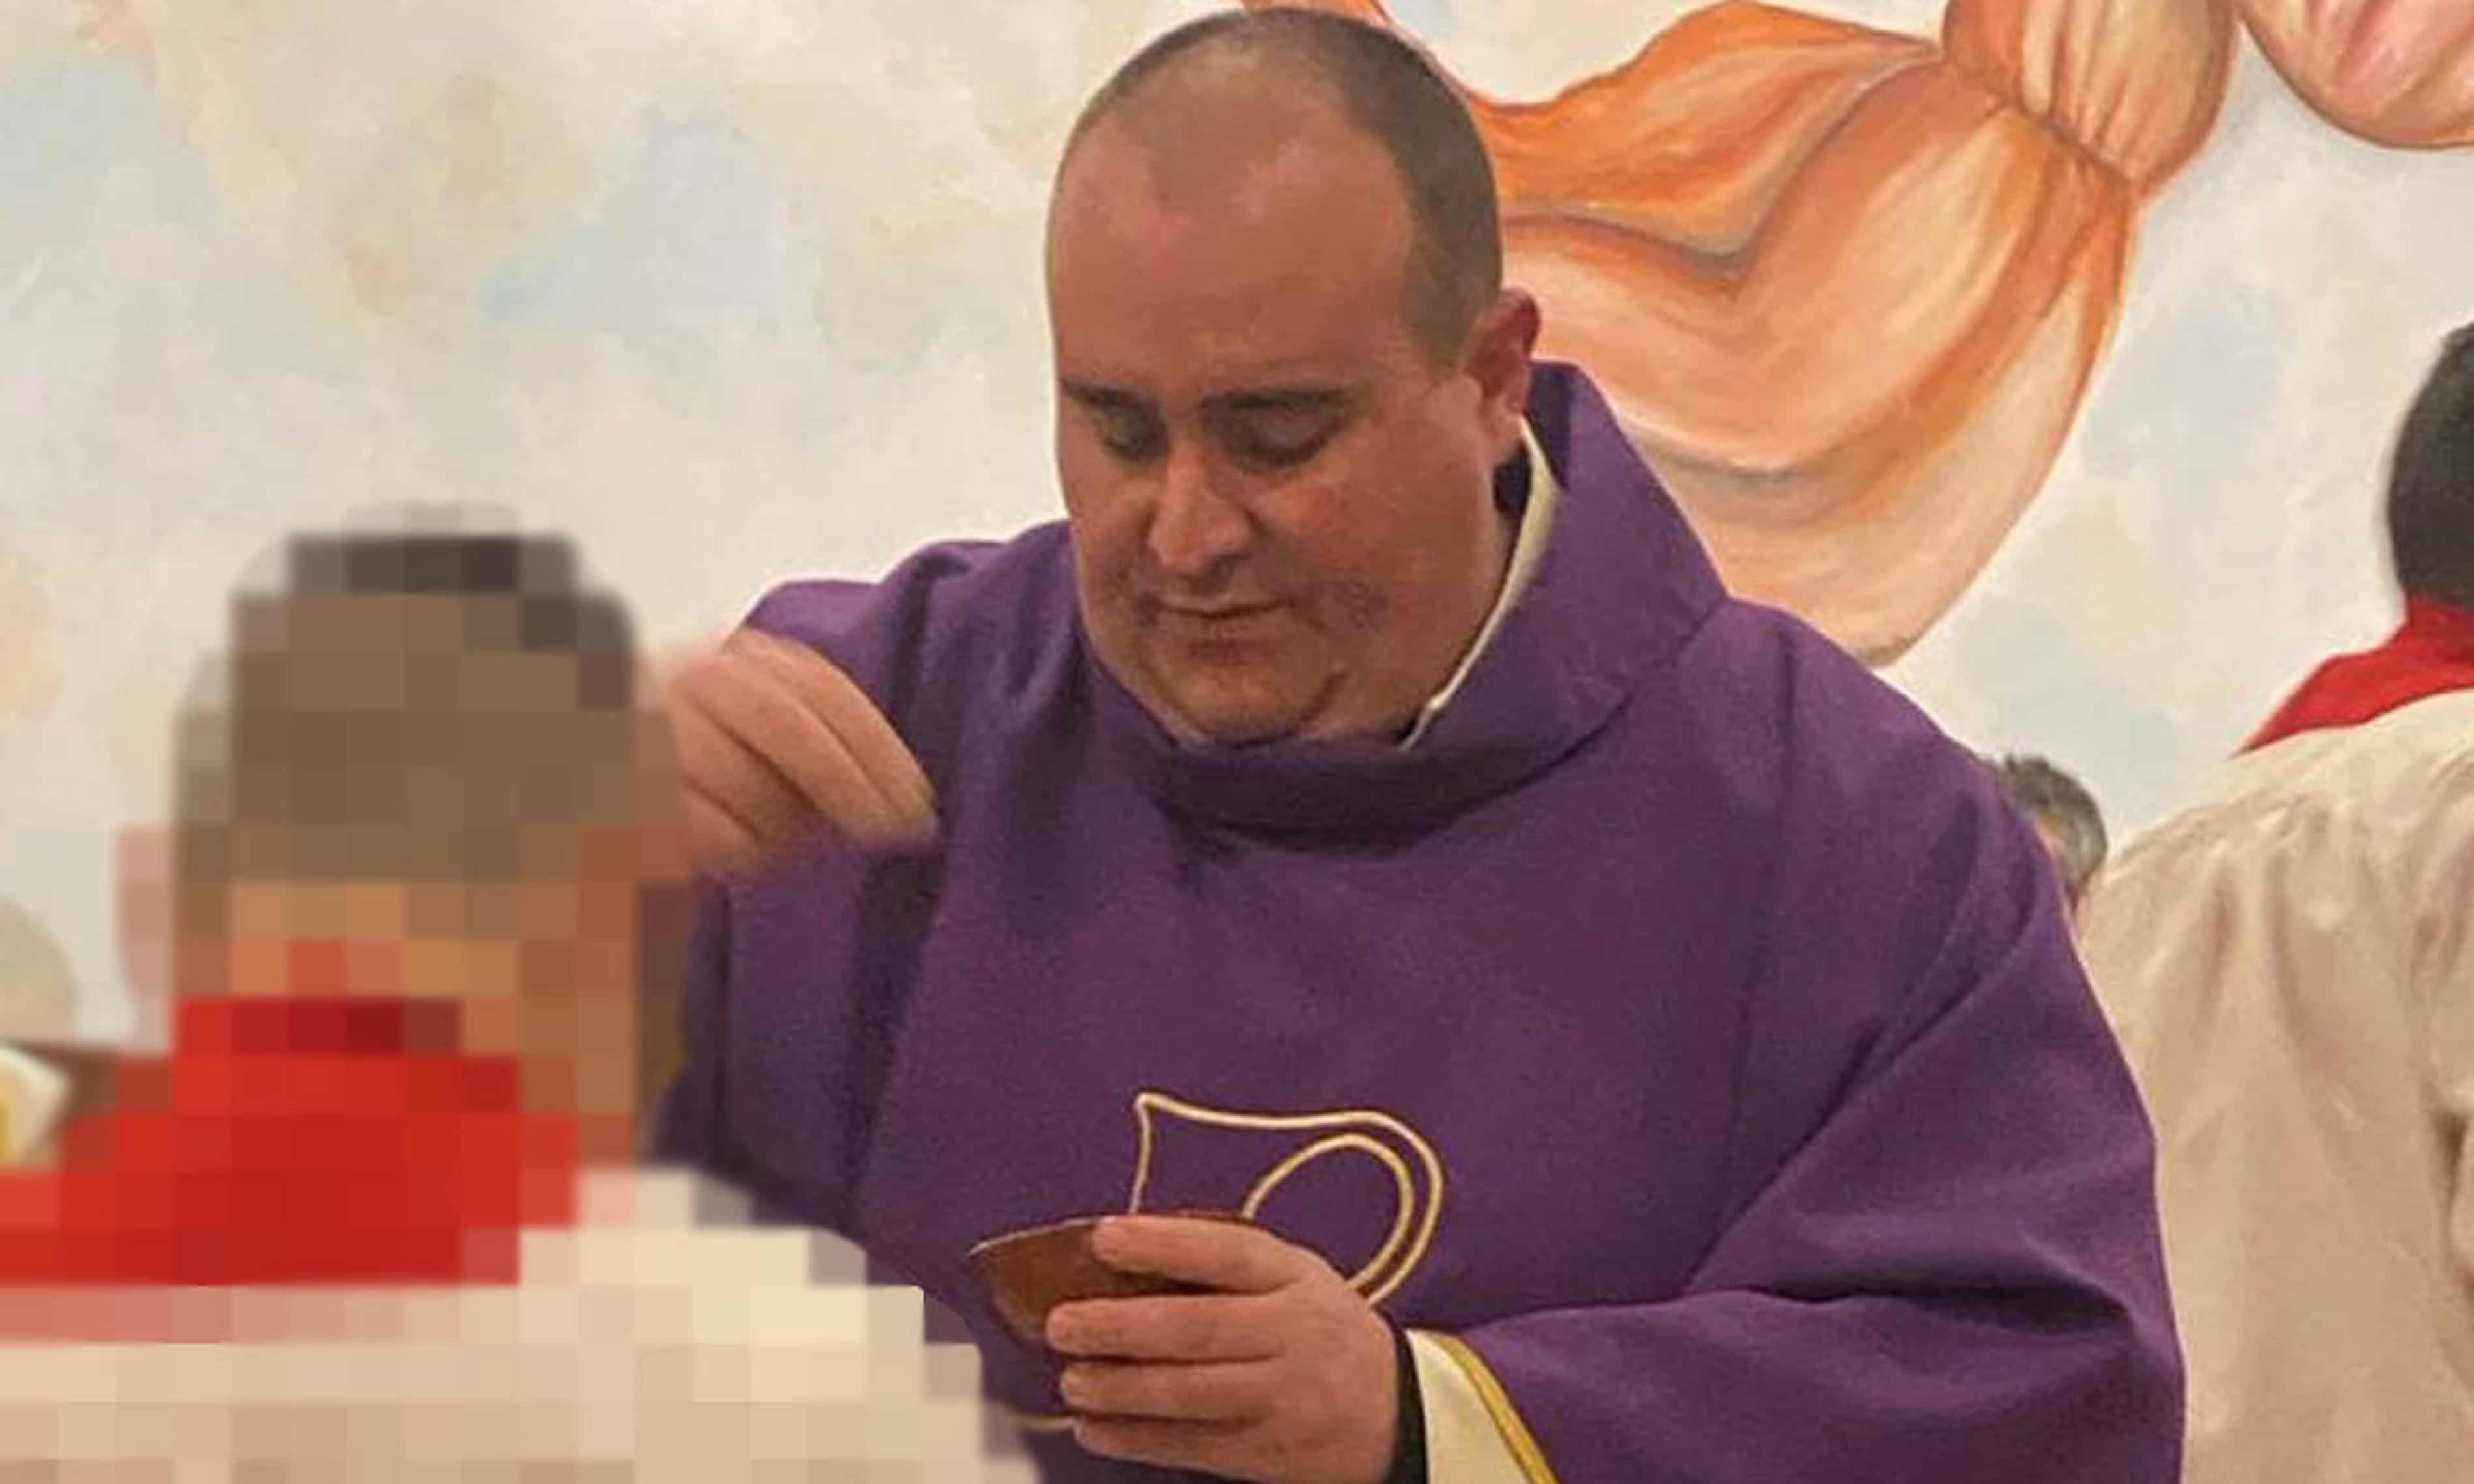 Poisoned chalice: bleach smell alerts Italian priest to apparent mafia threat (theguardian.com)